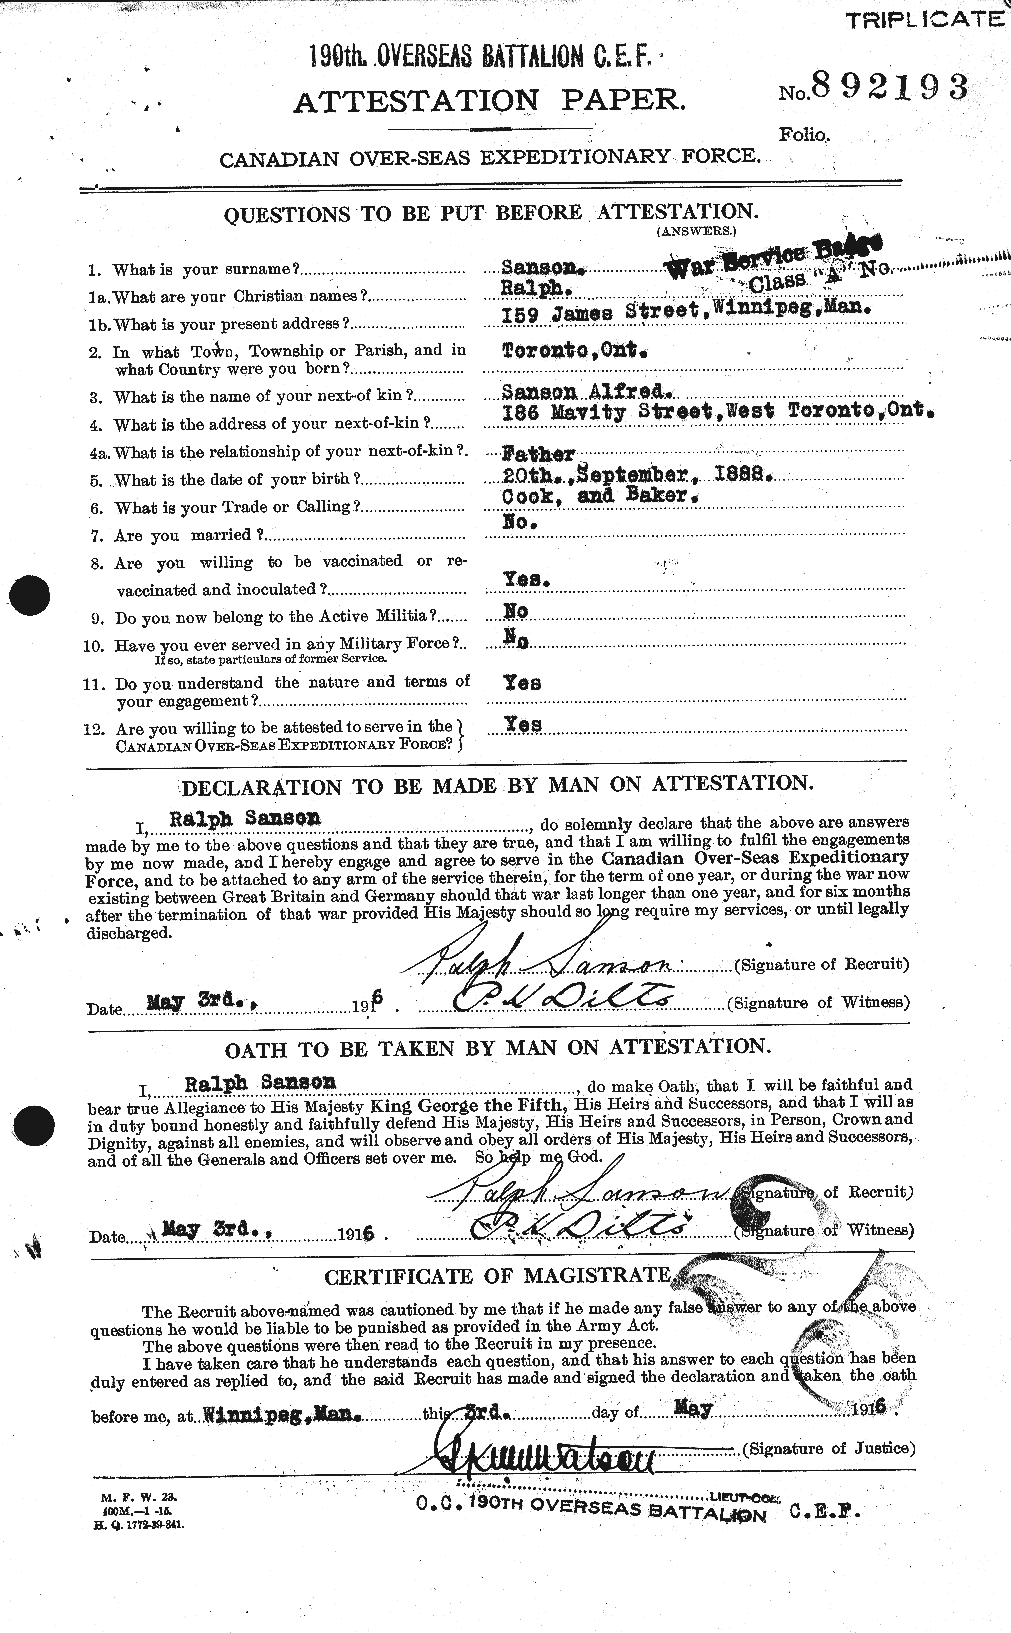 Personnel Records of the First World War - CEF 080400a